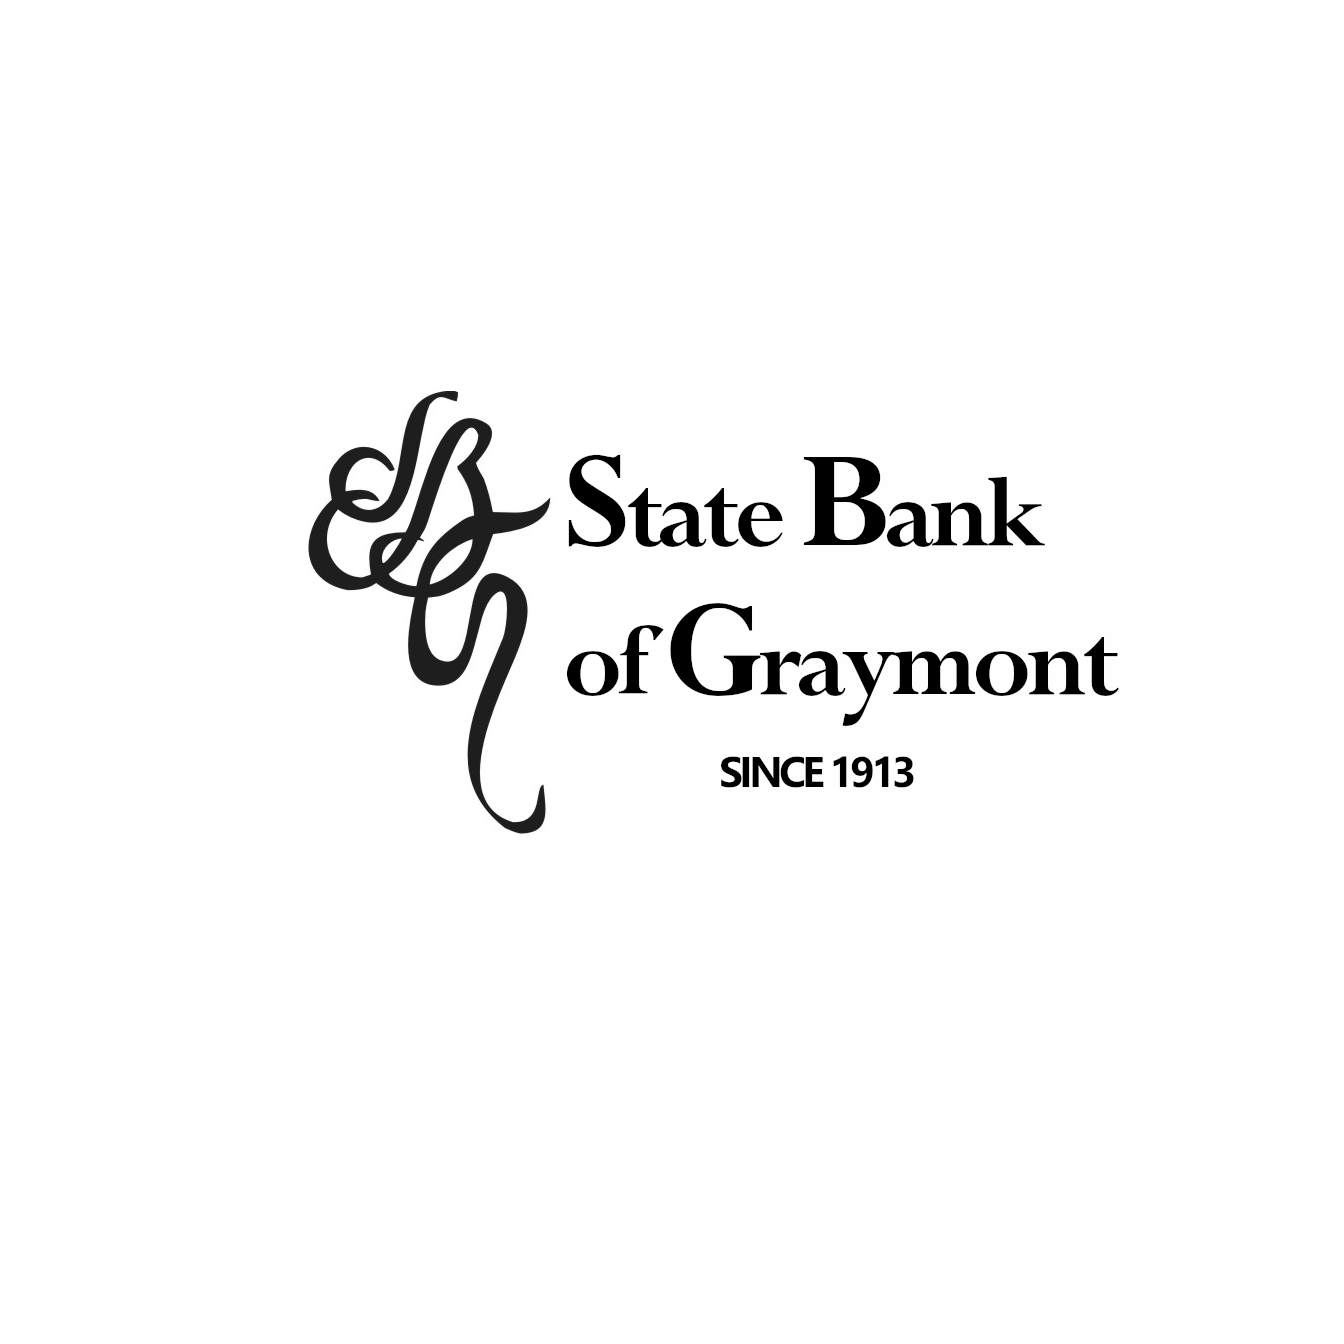 State Bank of Graymont